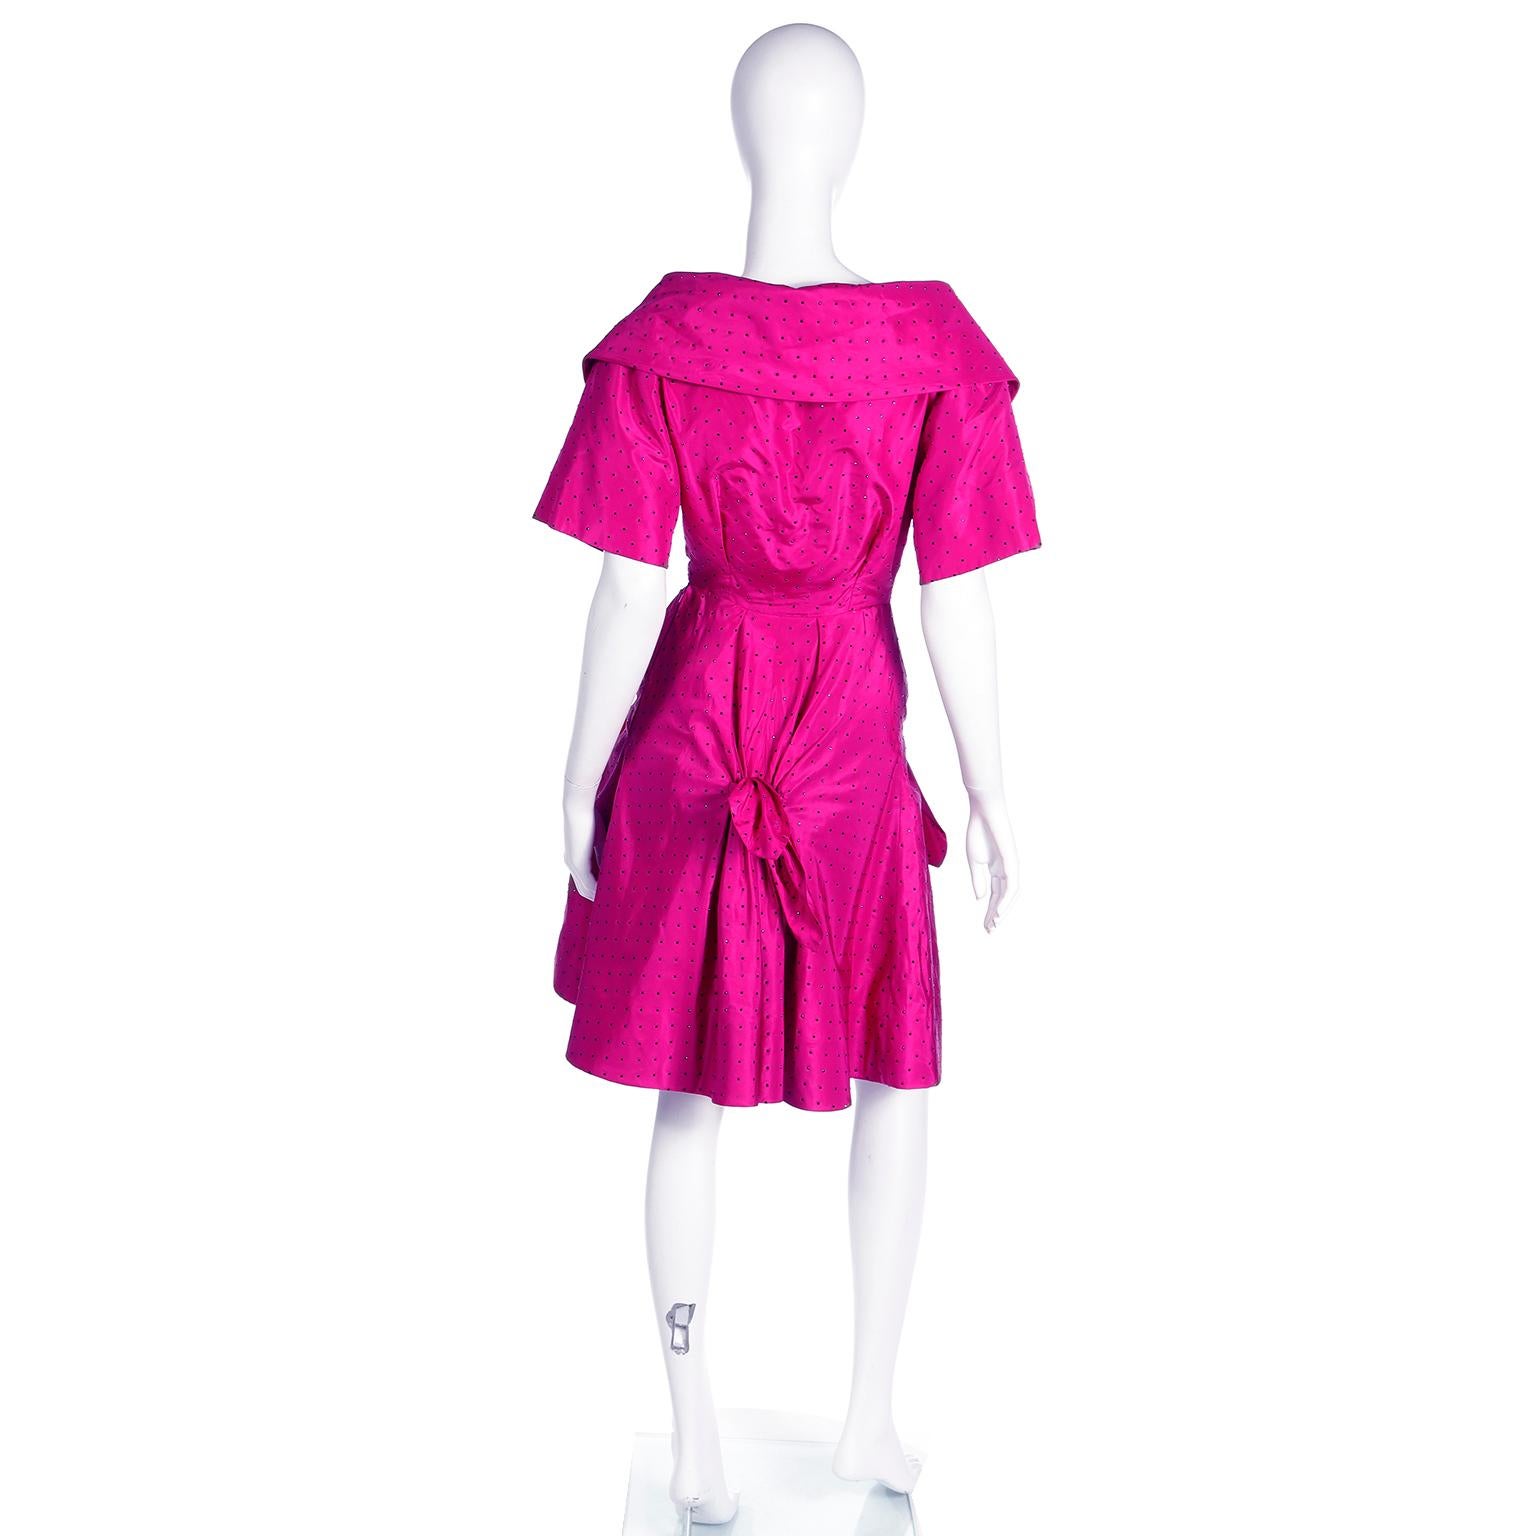 Christian Dior Couture 1987 Magenta Evening Dress w Crystals by Marc Bohan For Sale 9